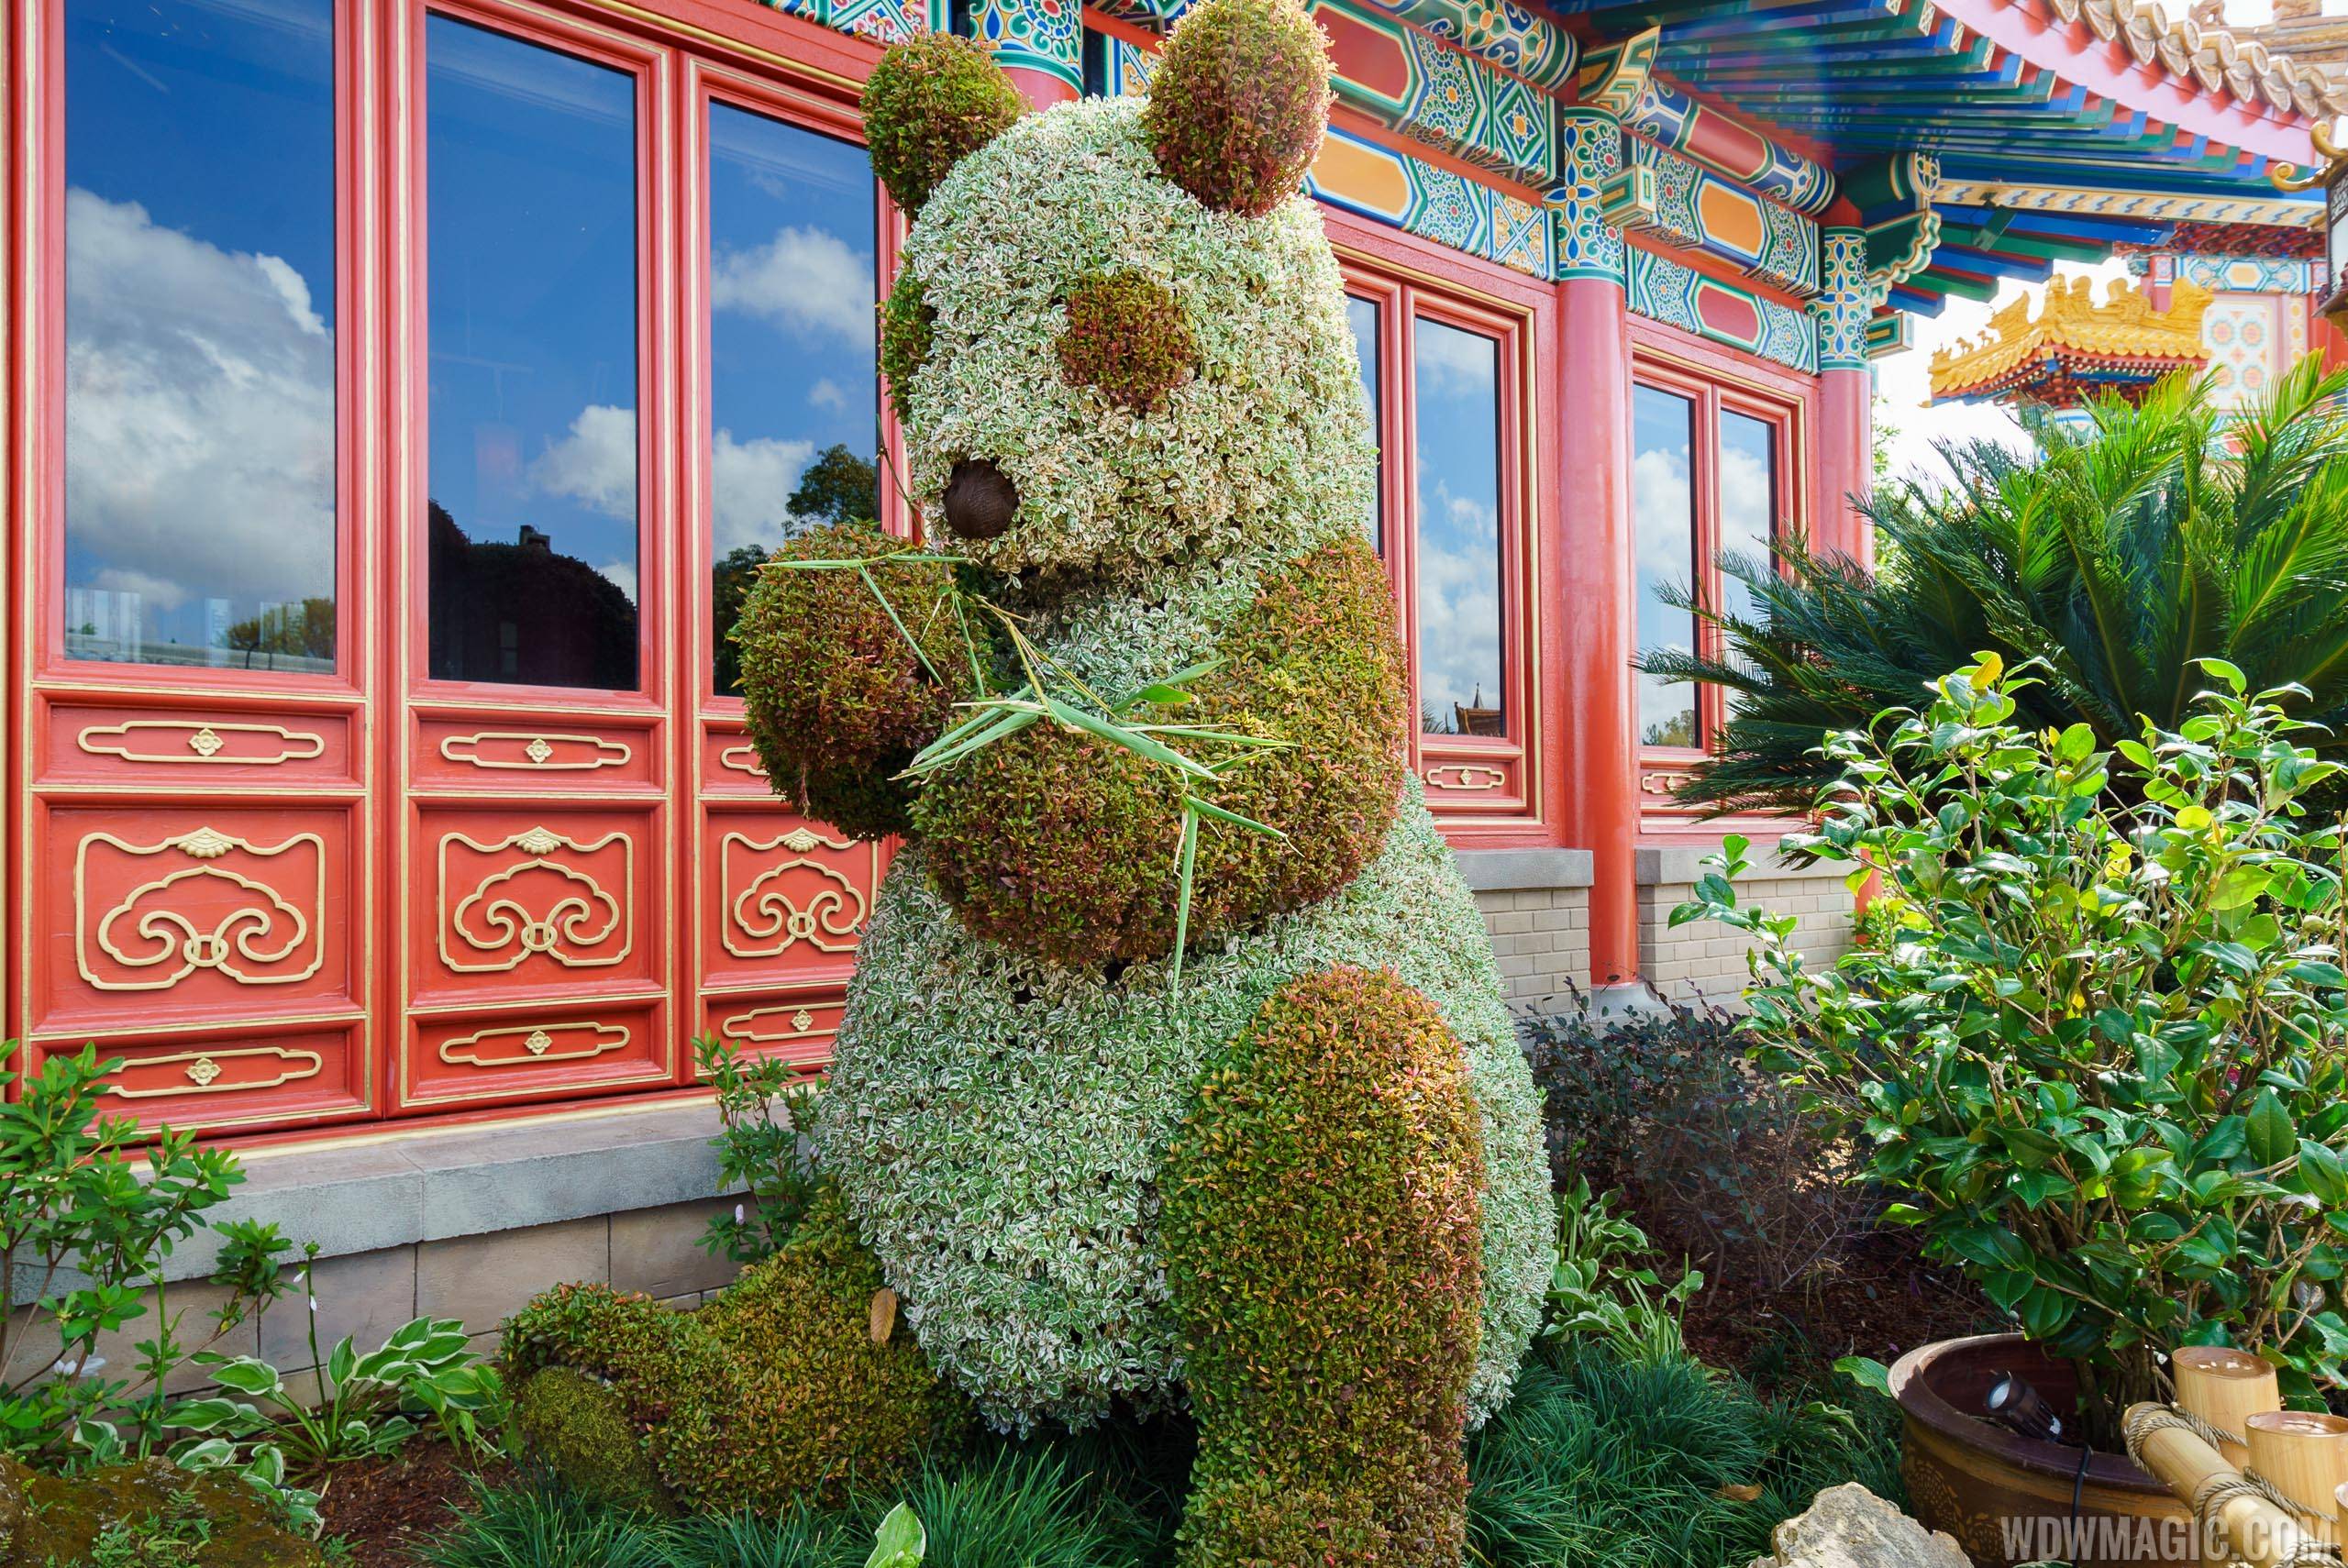 2017 Flower and Garden Festival - Panda topiary at China